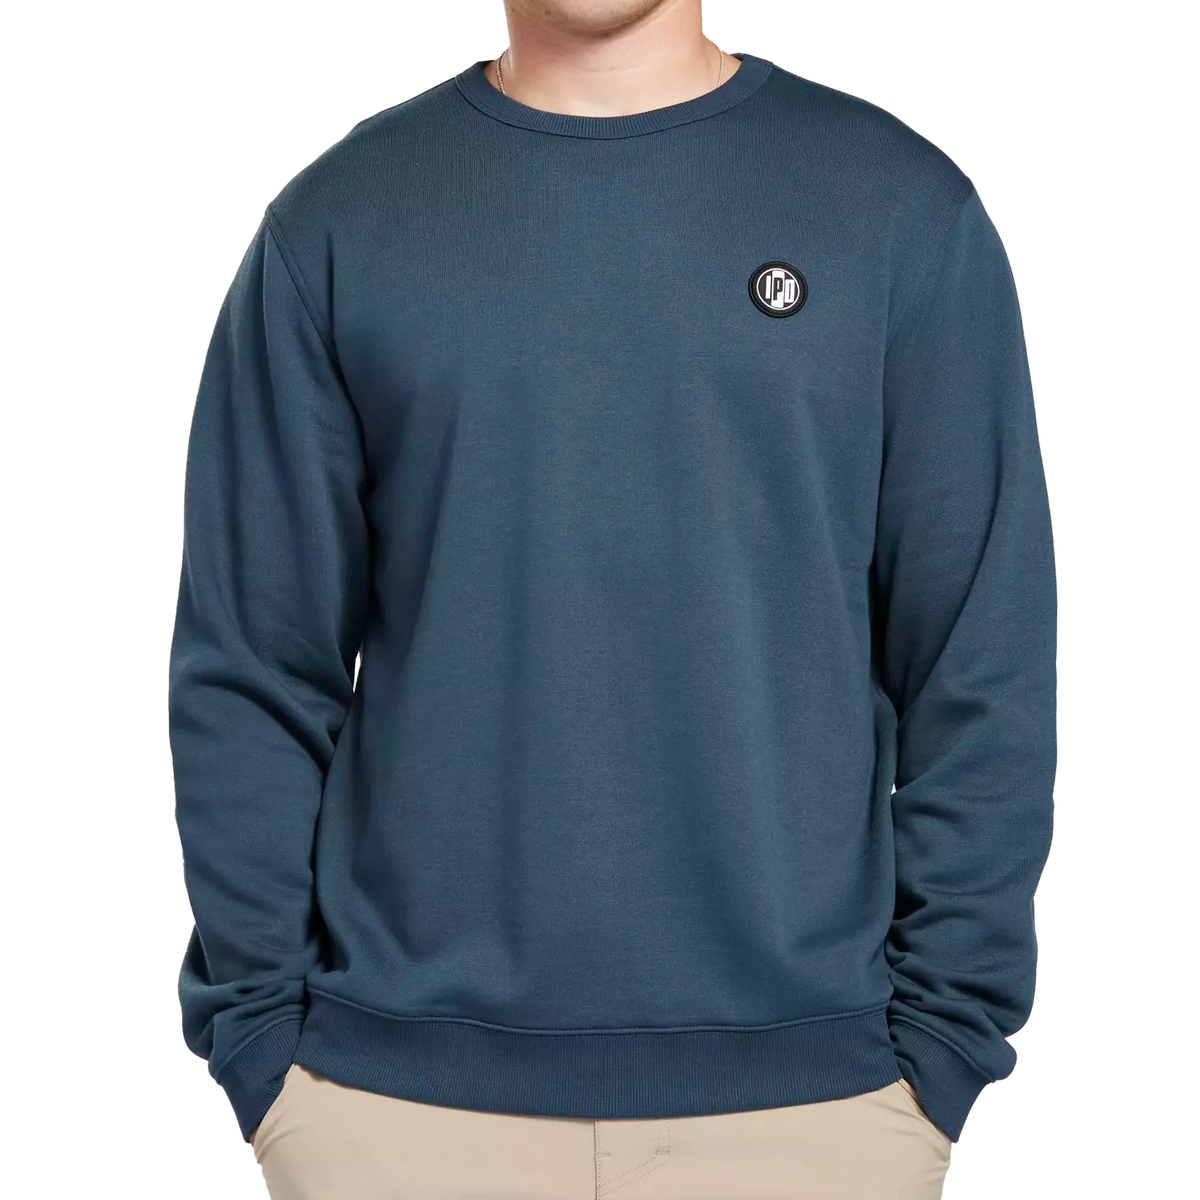 Navy blue crew neck fleece sweater with small I P D logo over the heart front.